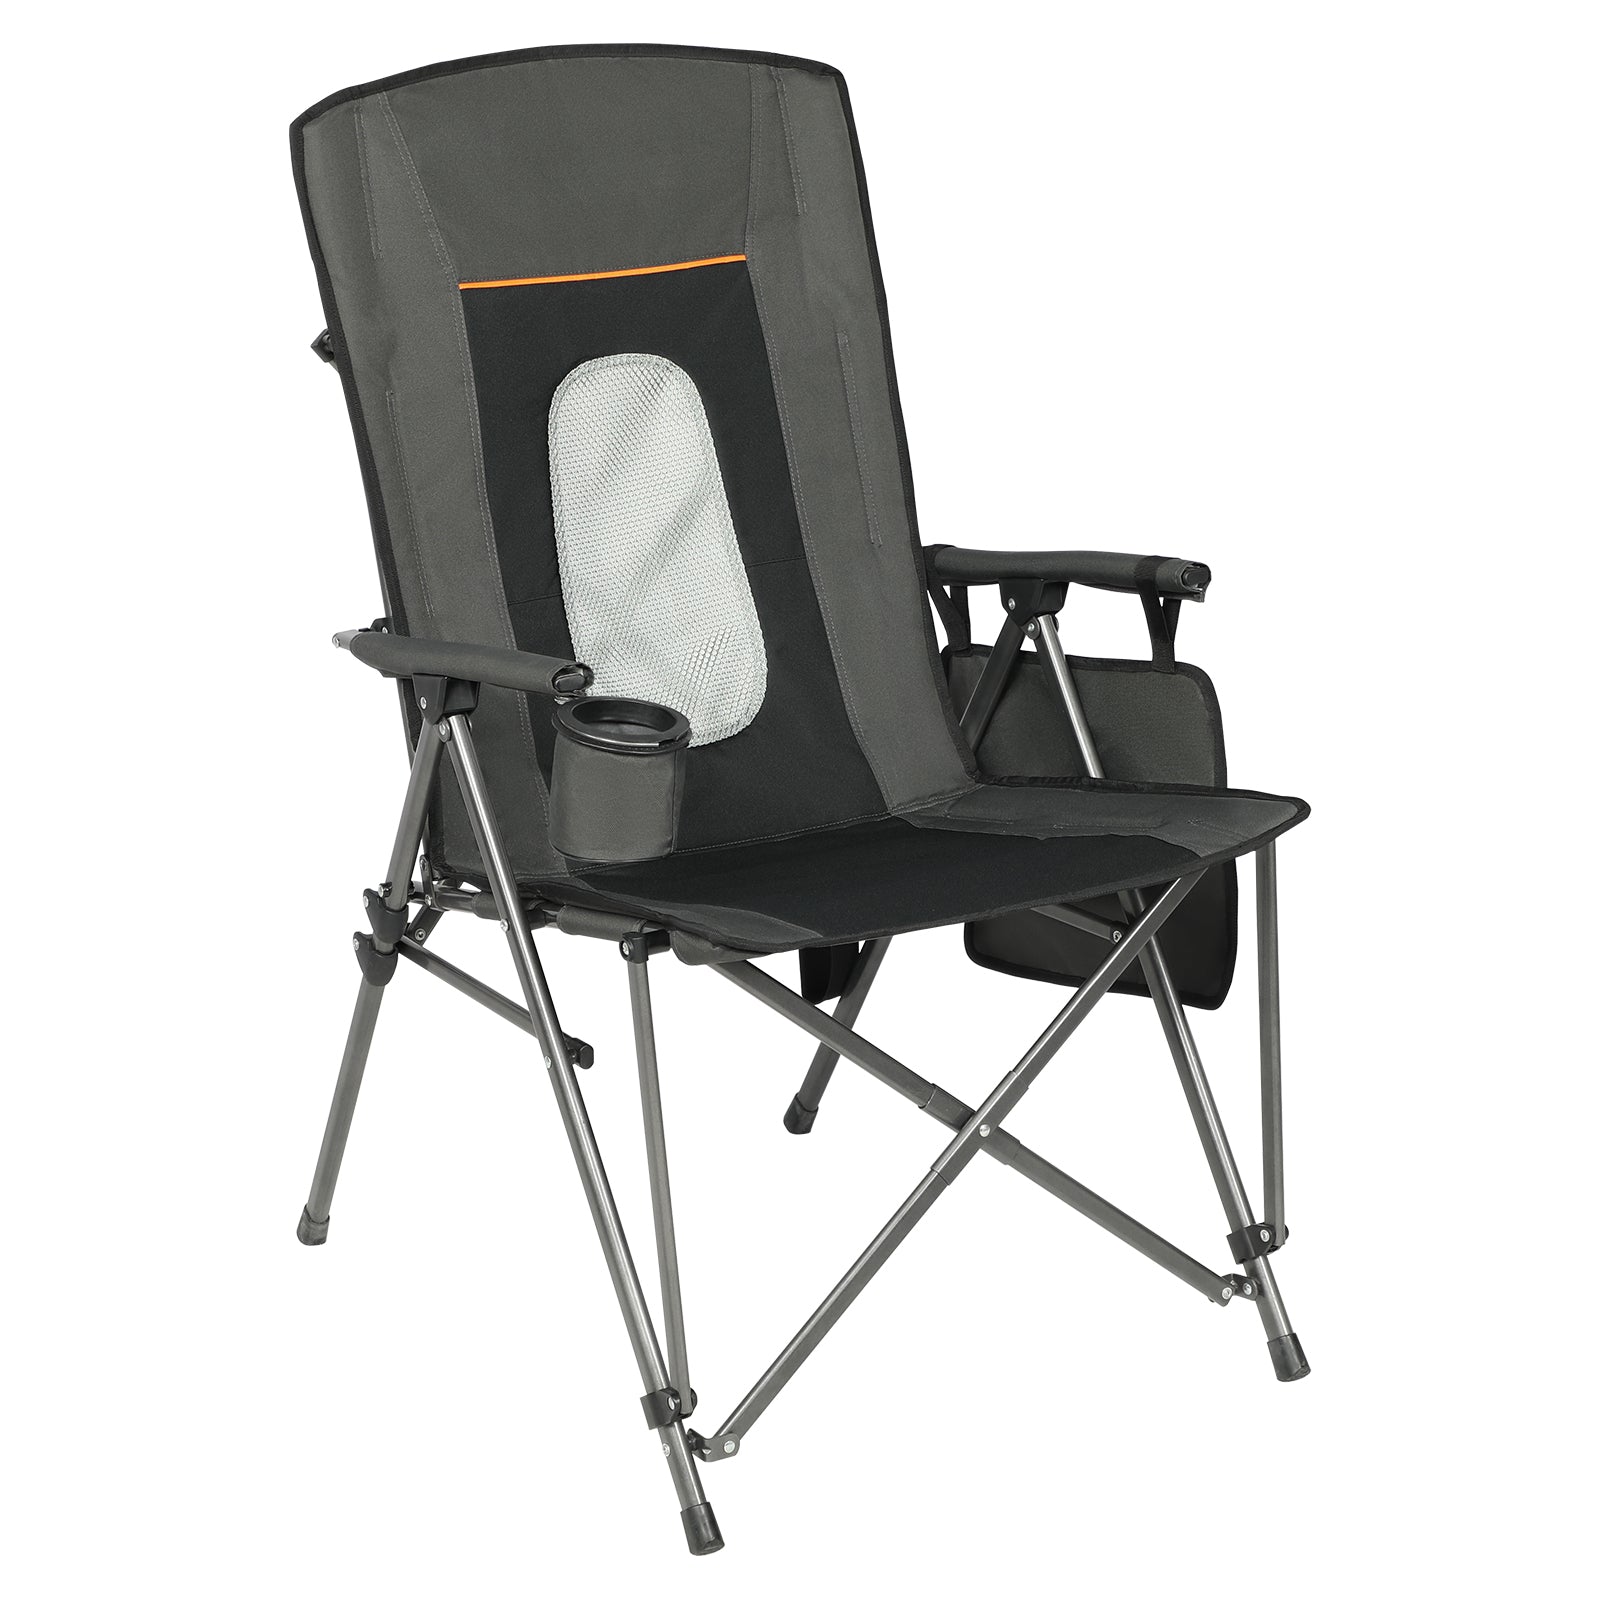 Oversized Quad Camping Chair | Portal Outdoors Black